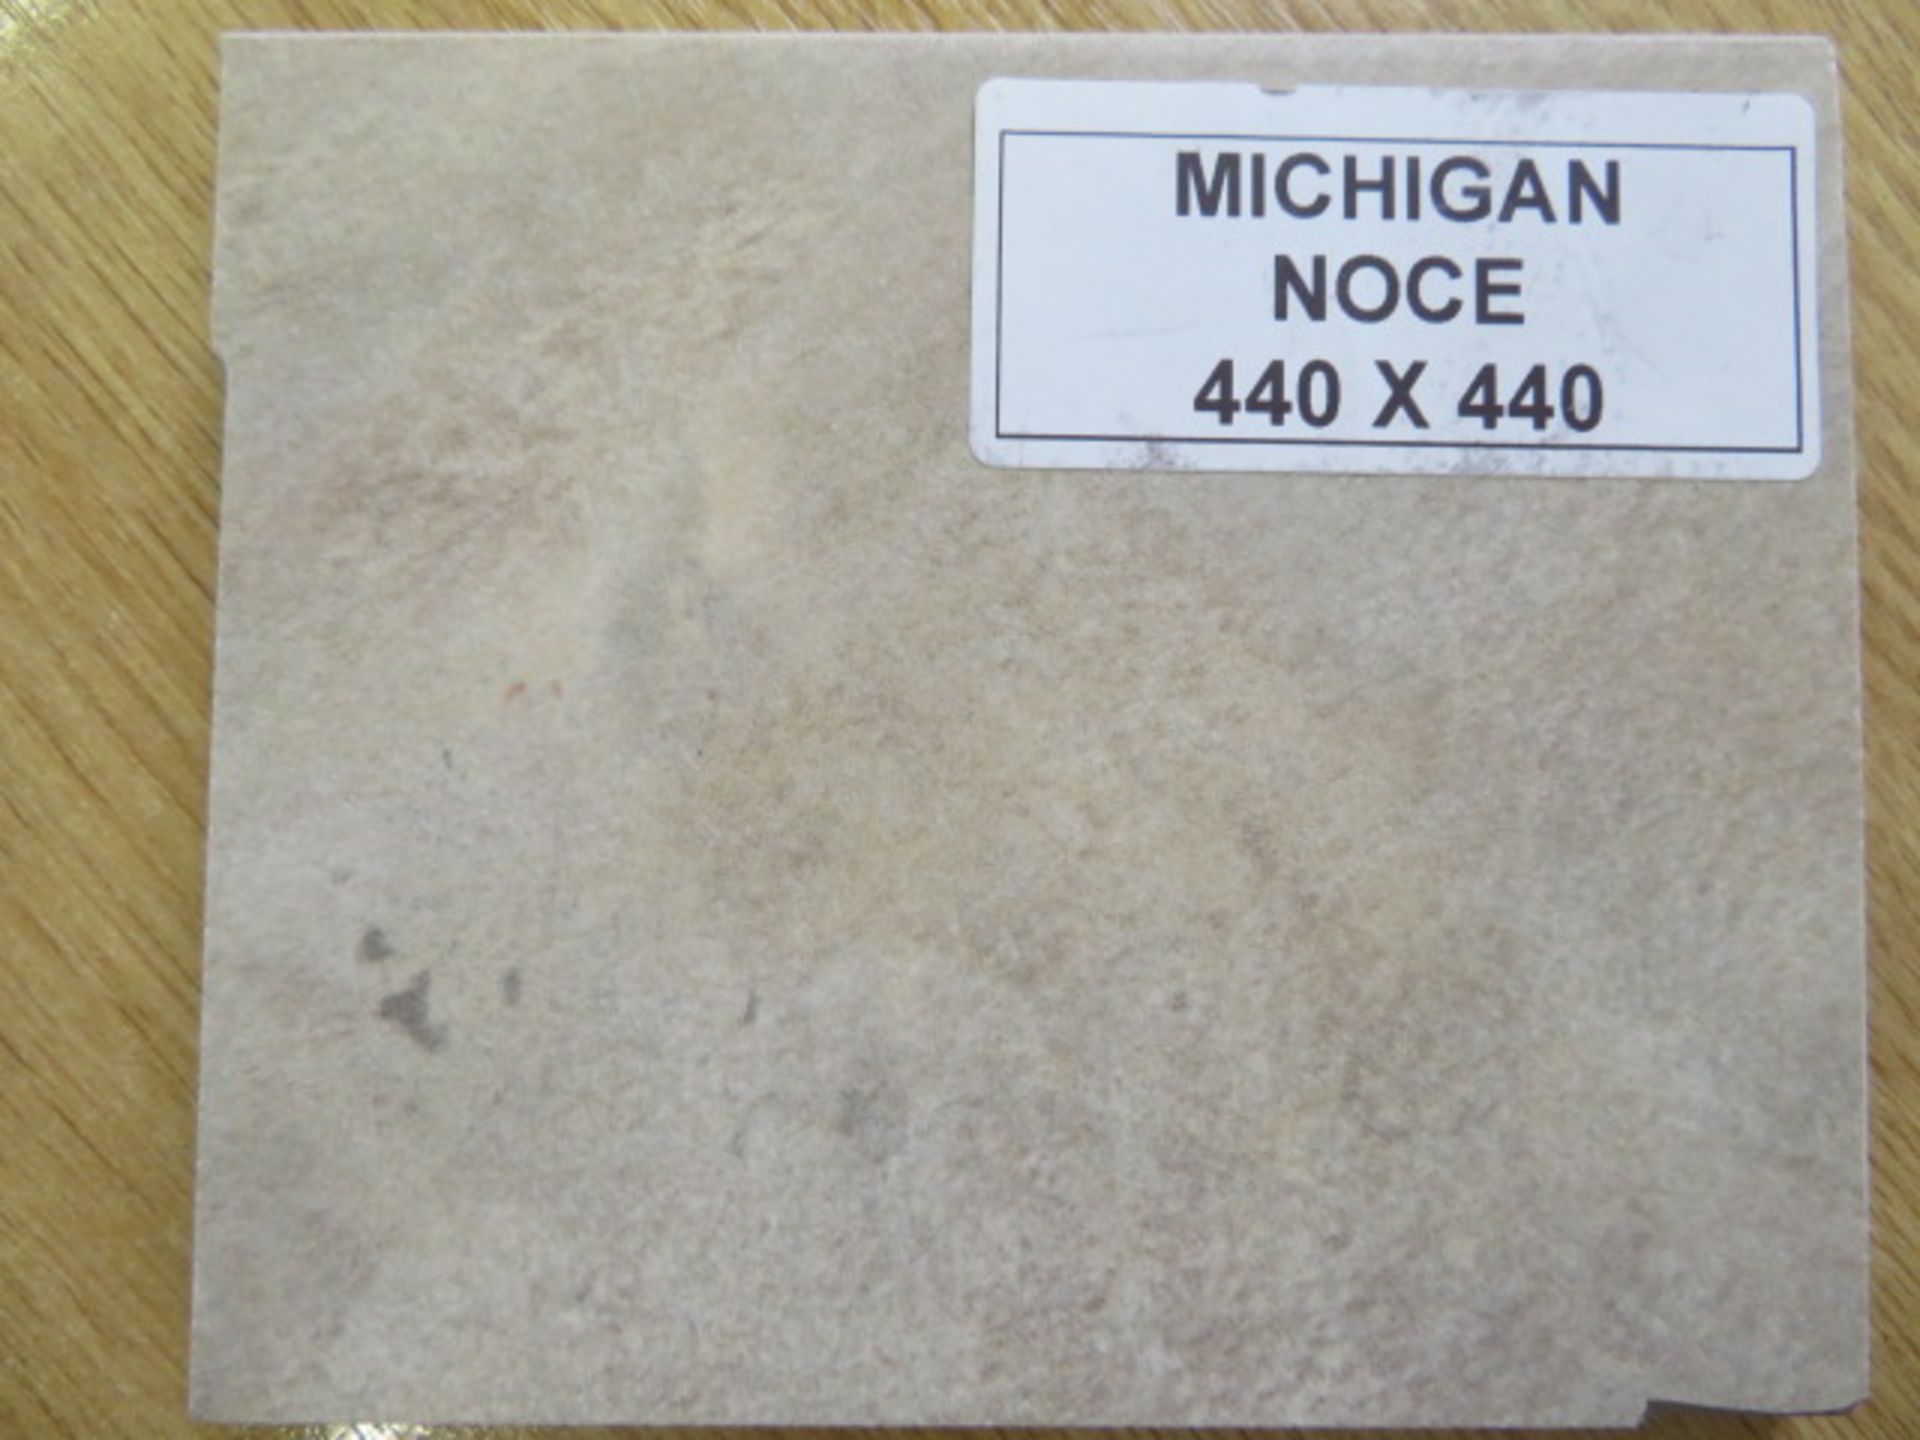 NEW 9 Square Meters of Michigan Noce Matte Wall and Floor Tiles. 440x440mm per tile, 8mm thick... - Image 3 of 3